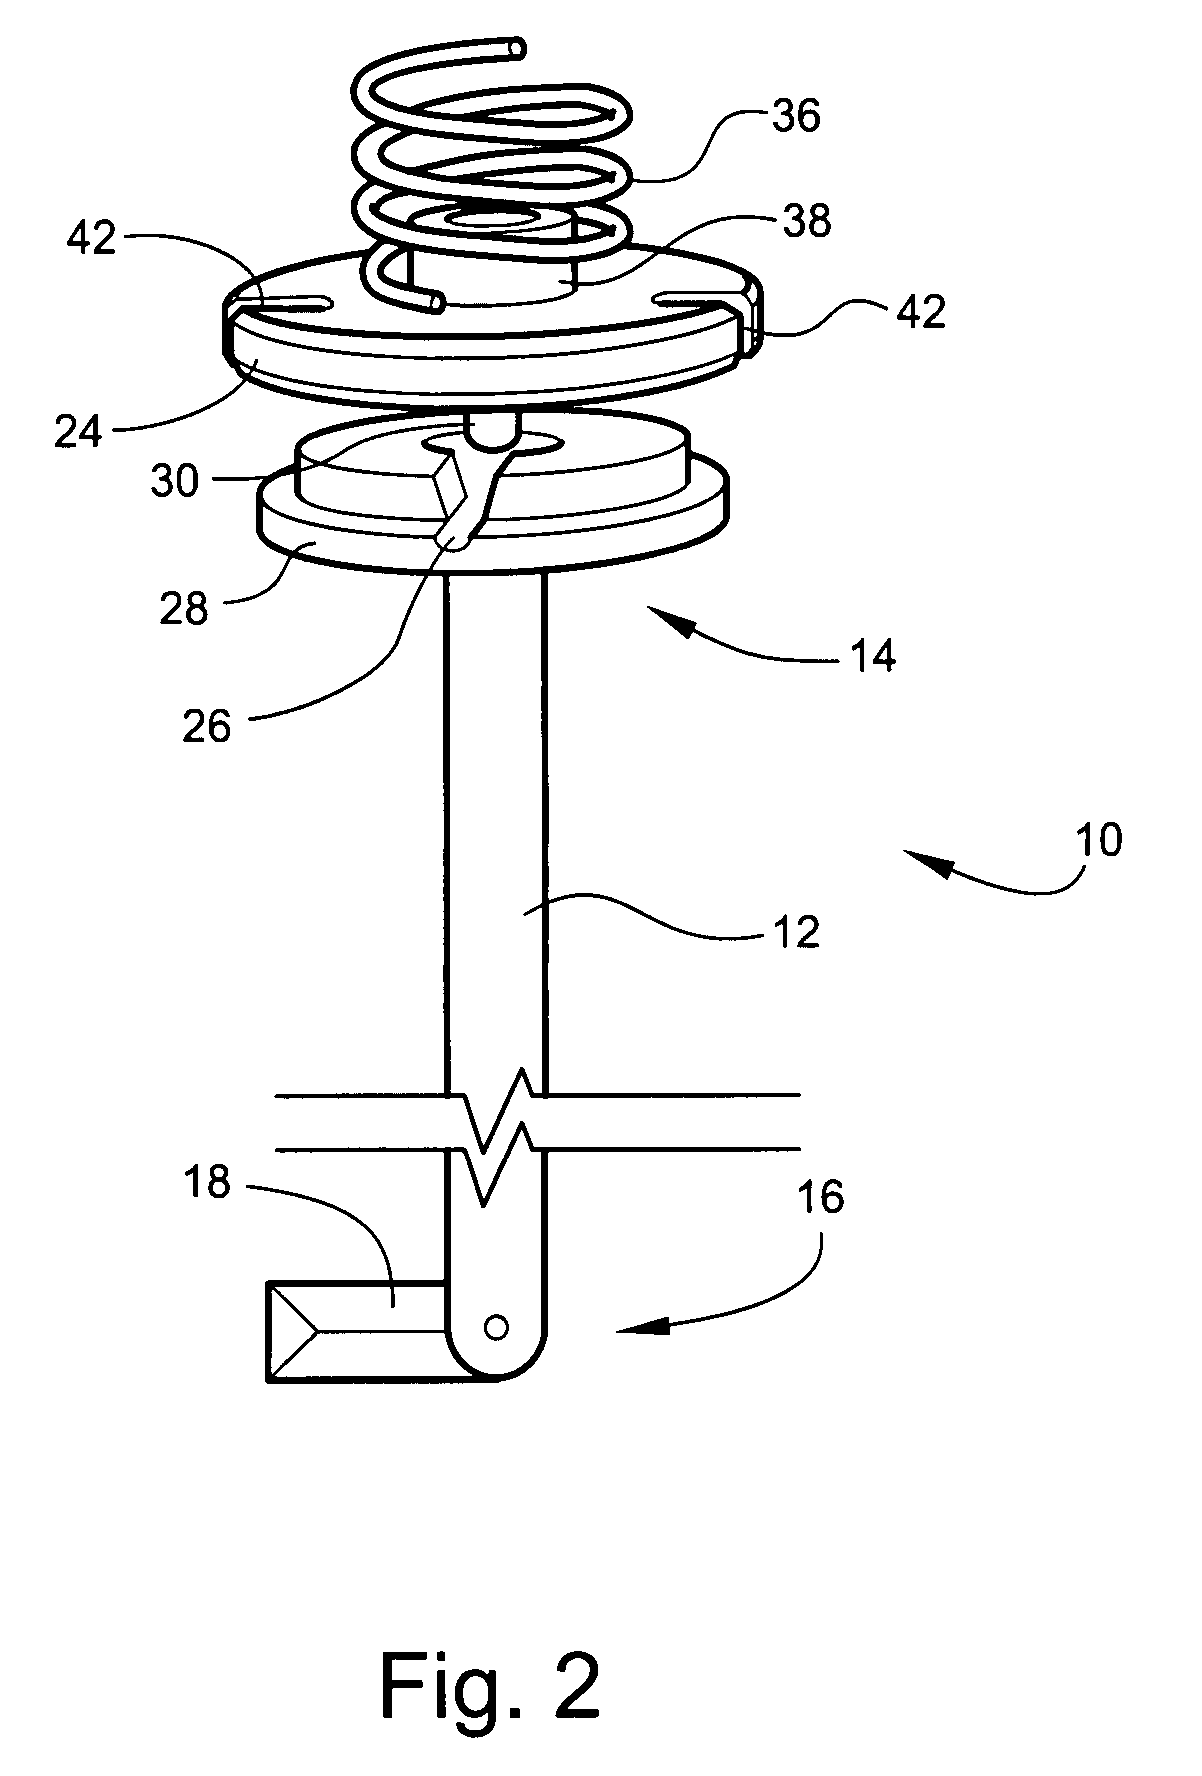 Axial load limiting system and methods